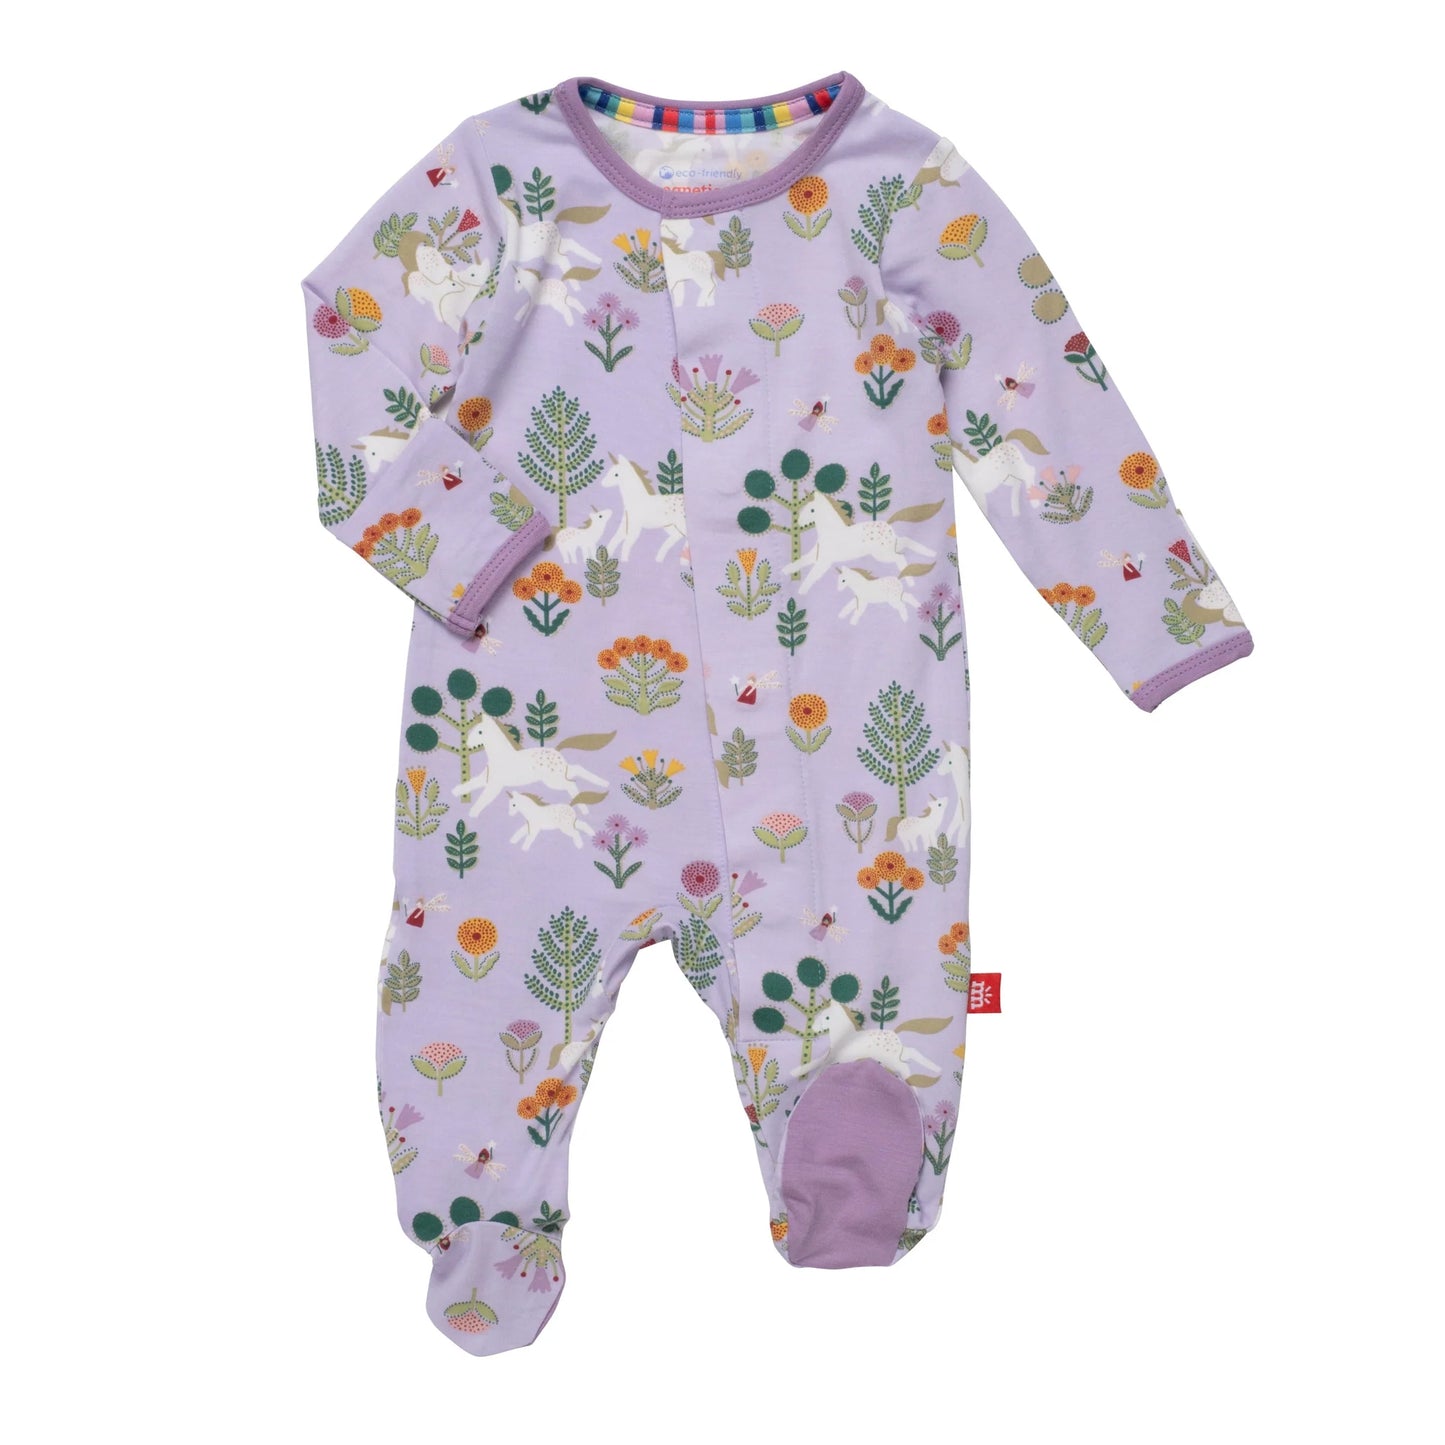 A GOTS certified Organic Cotton Folk Magic Footie by Magnetic Me! with unicorns and flowers on it.